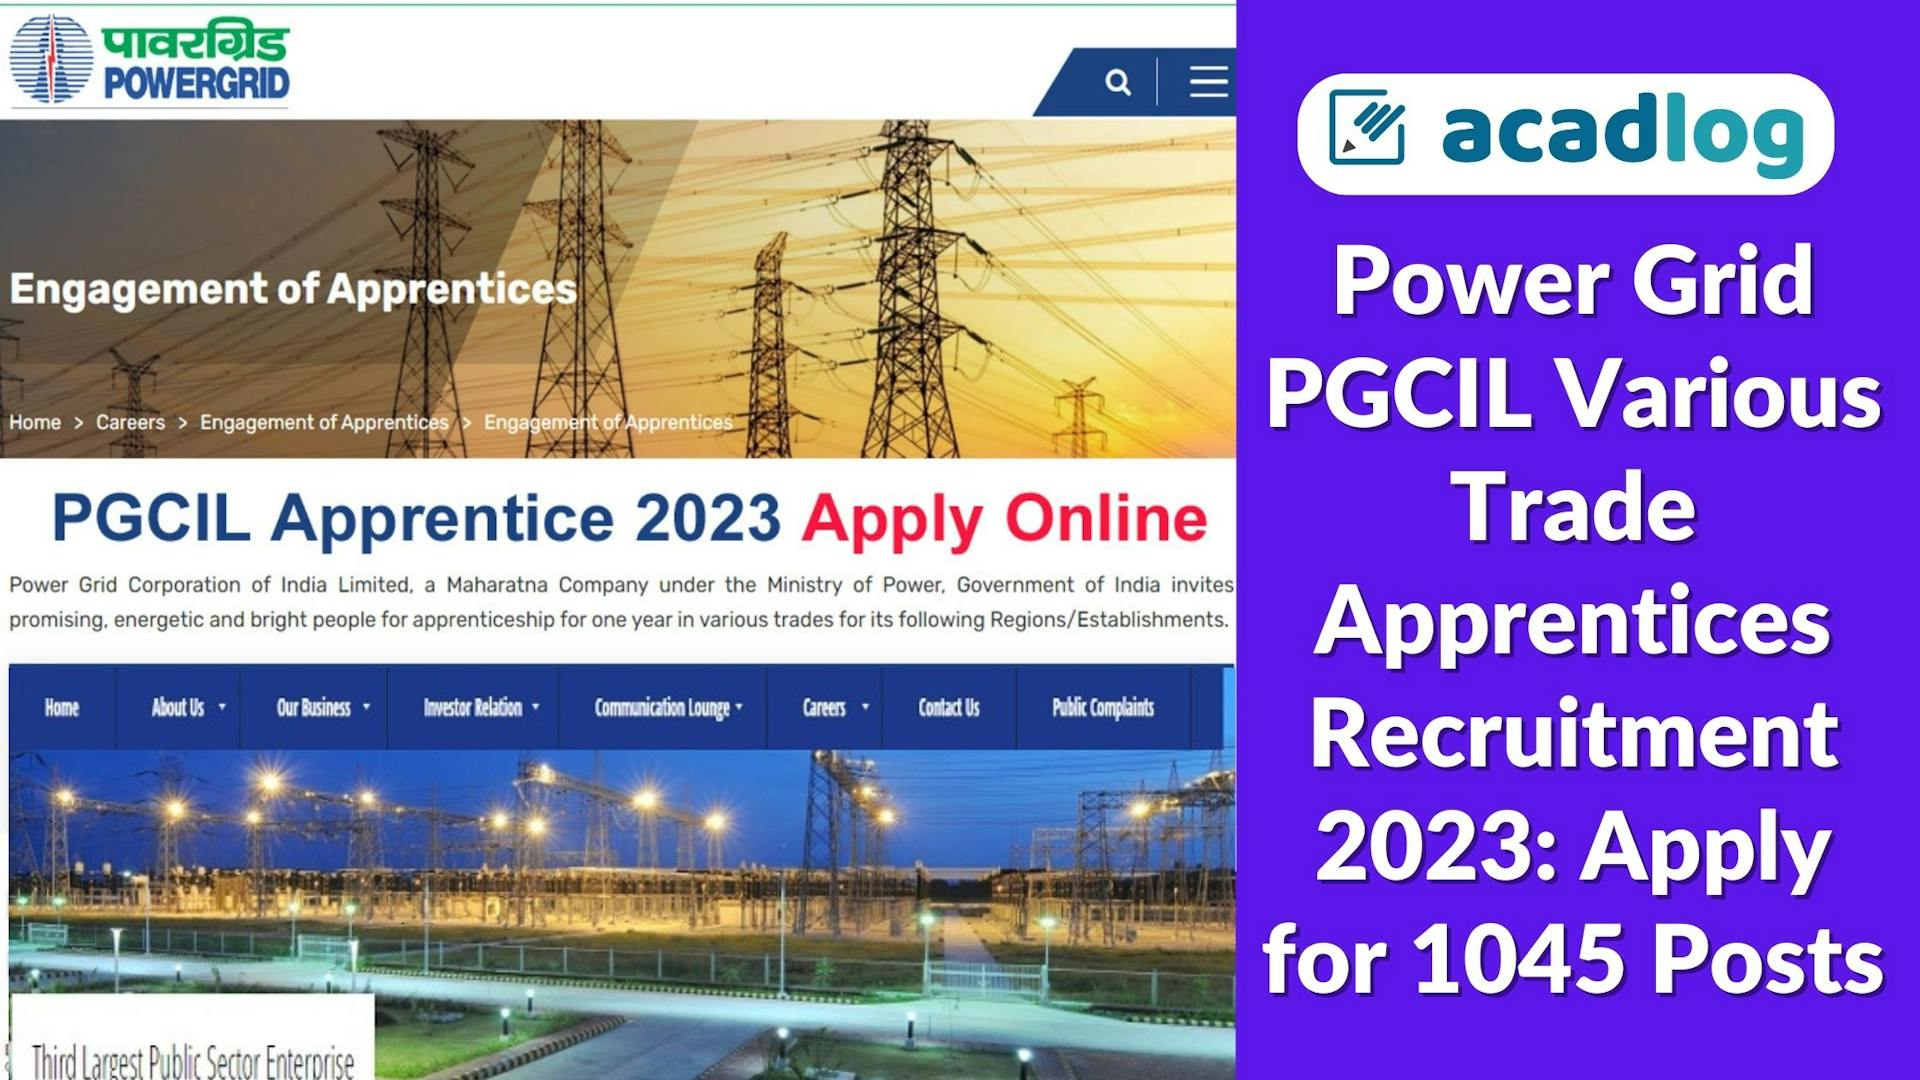 Power Grid PGCIL Various Trade Apprentices Recruitment 2023: Apply for 1045 Posts